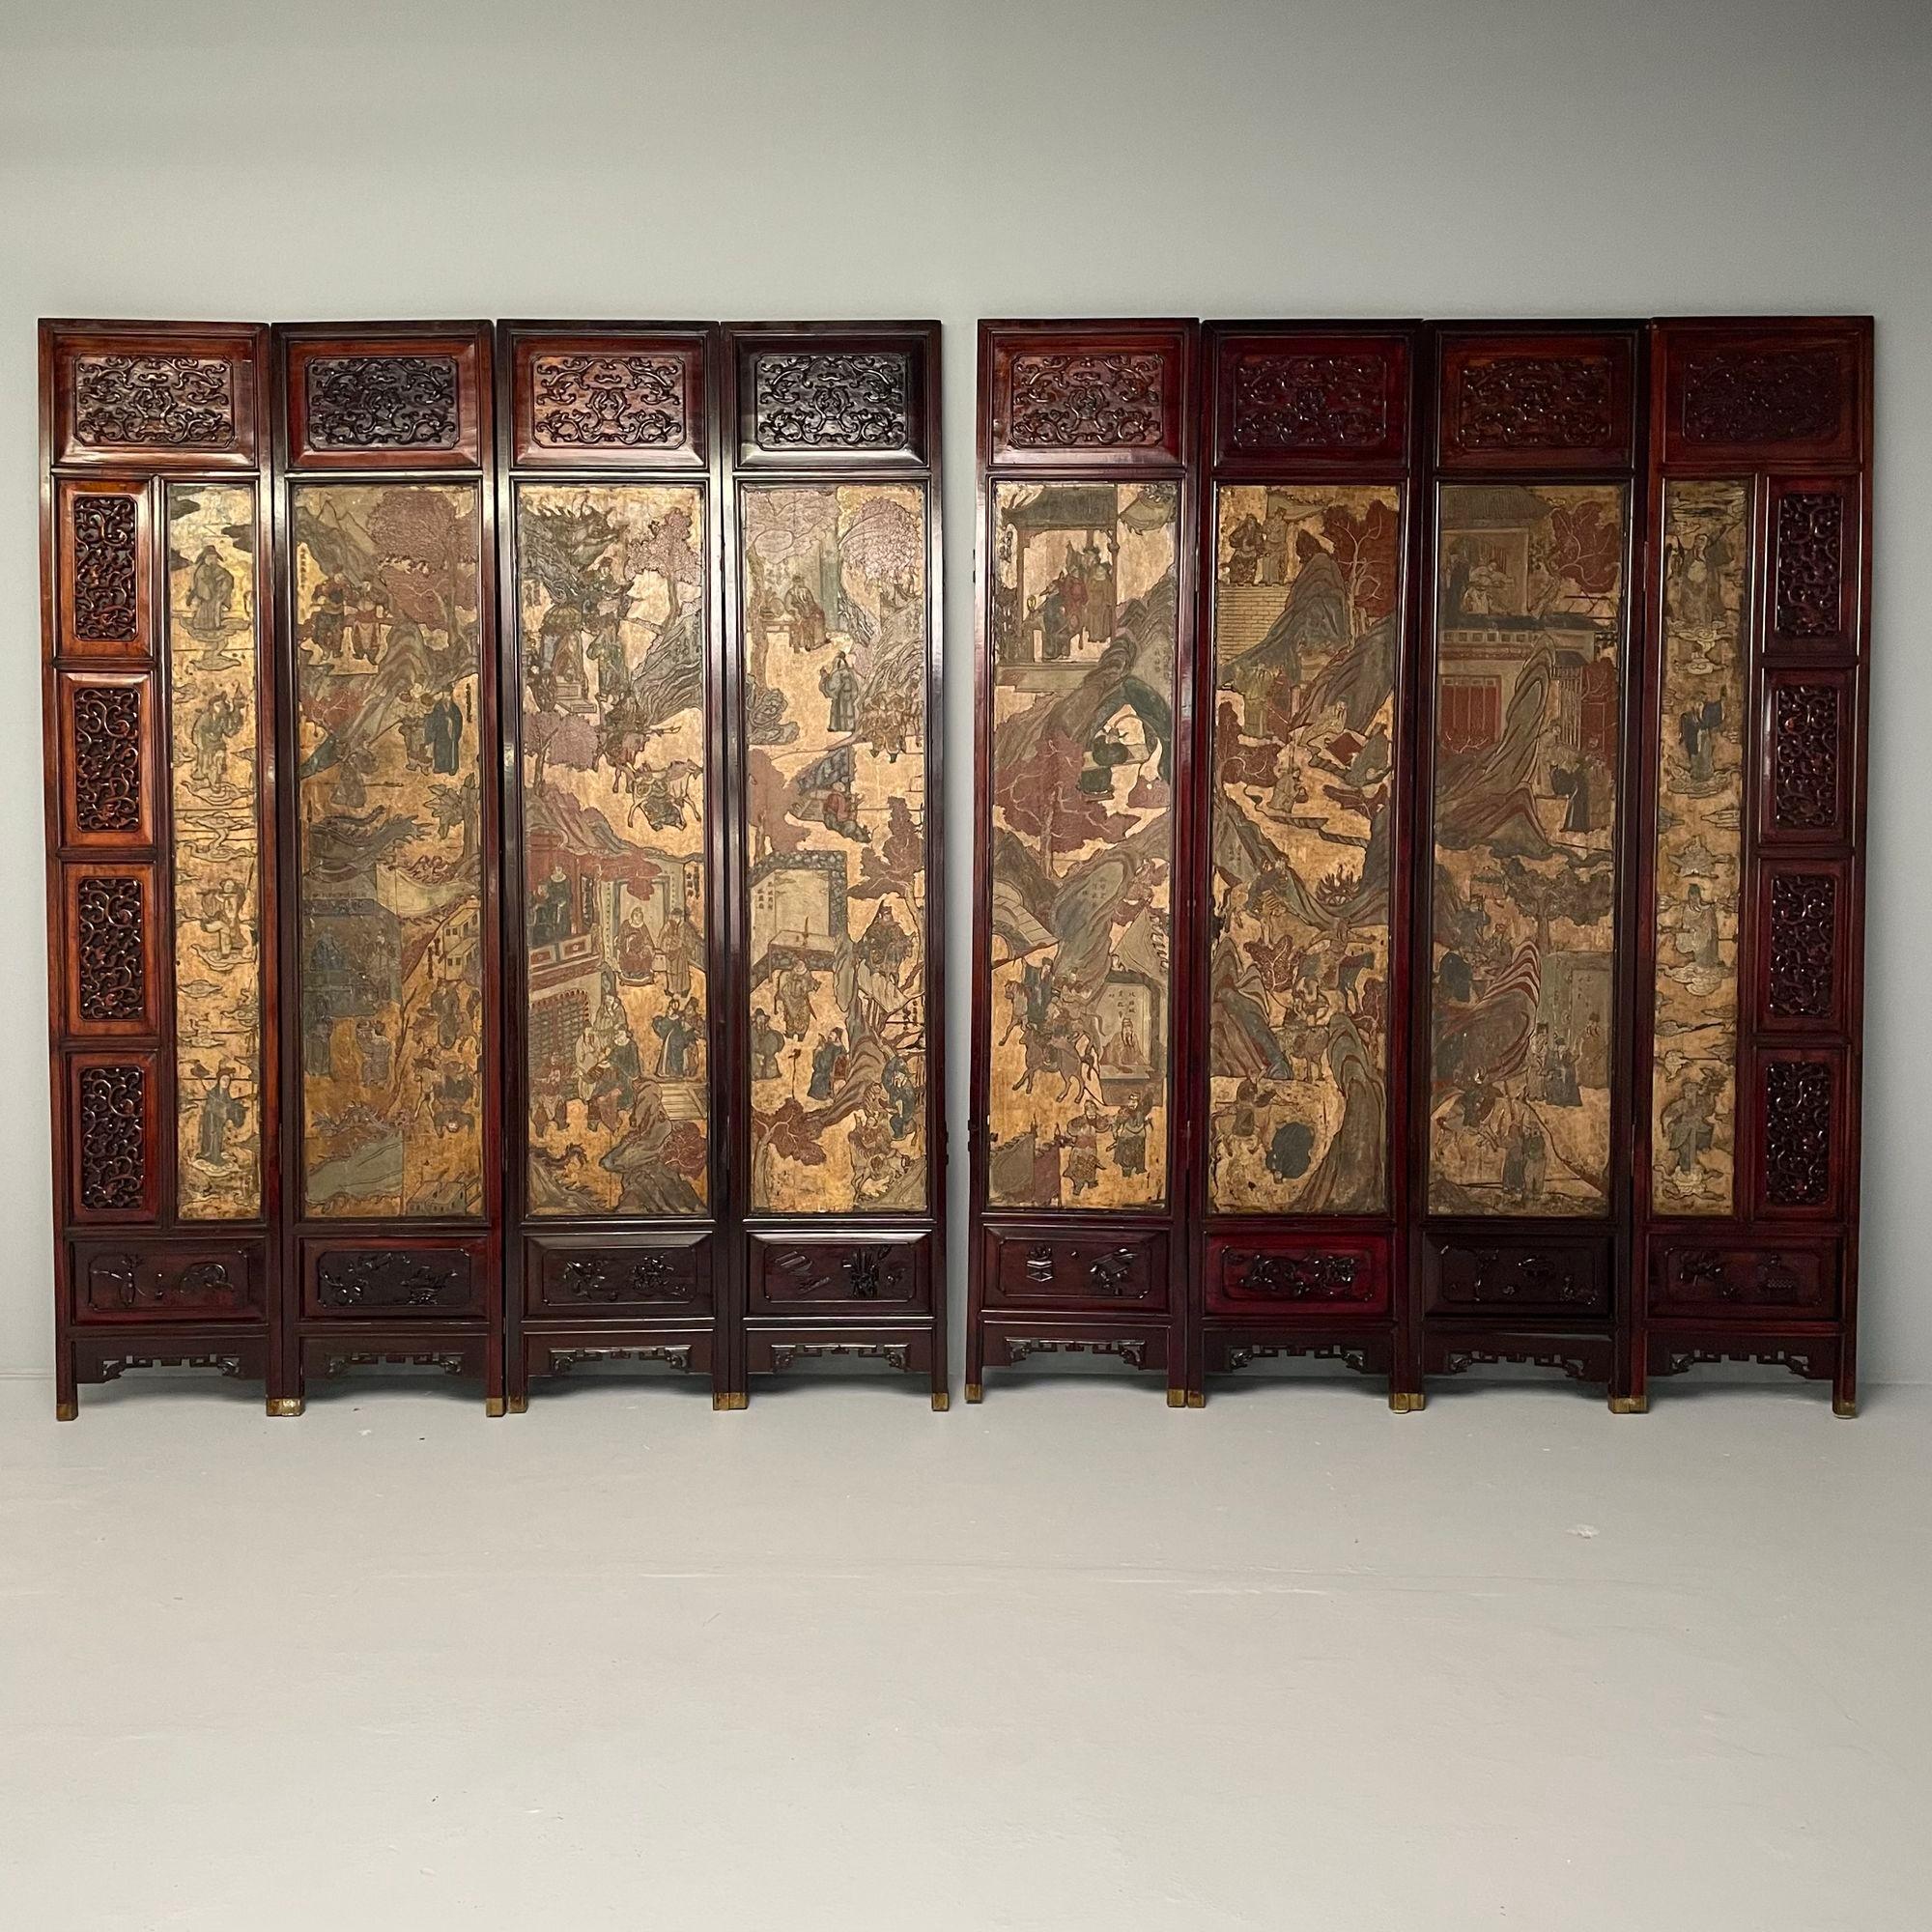 Rosewood Unusual Eight Panel Chinese Coromandel Screen circa 1700-1800 with Carved Frame For Sale